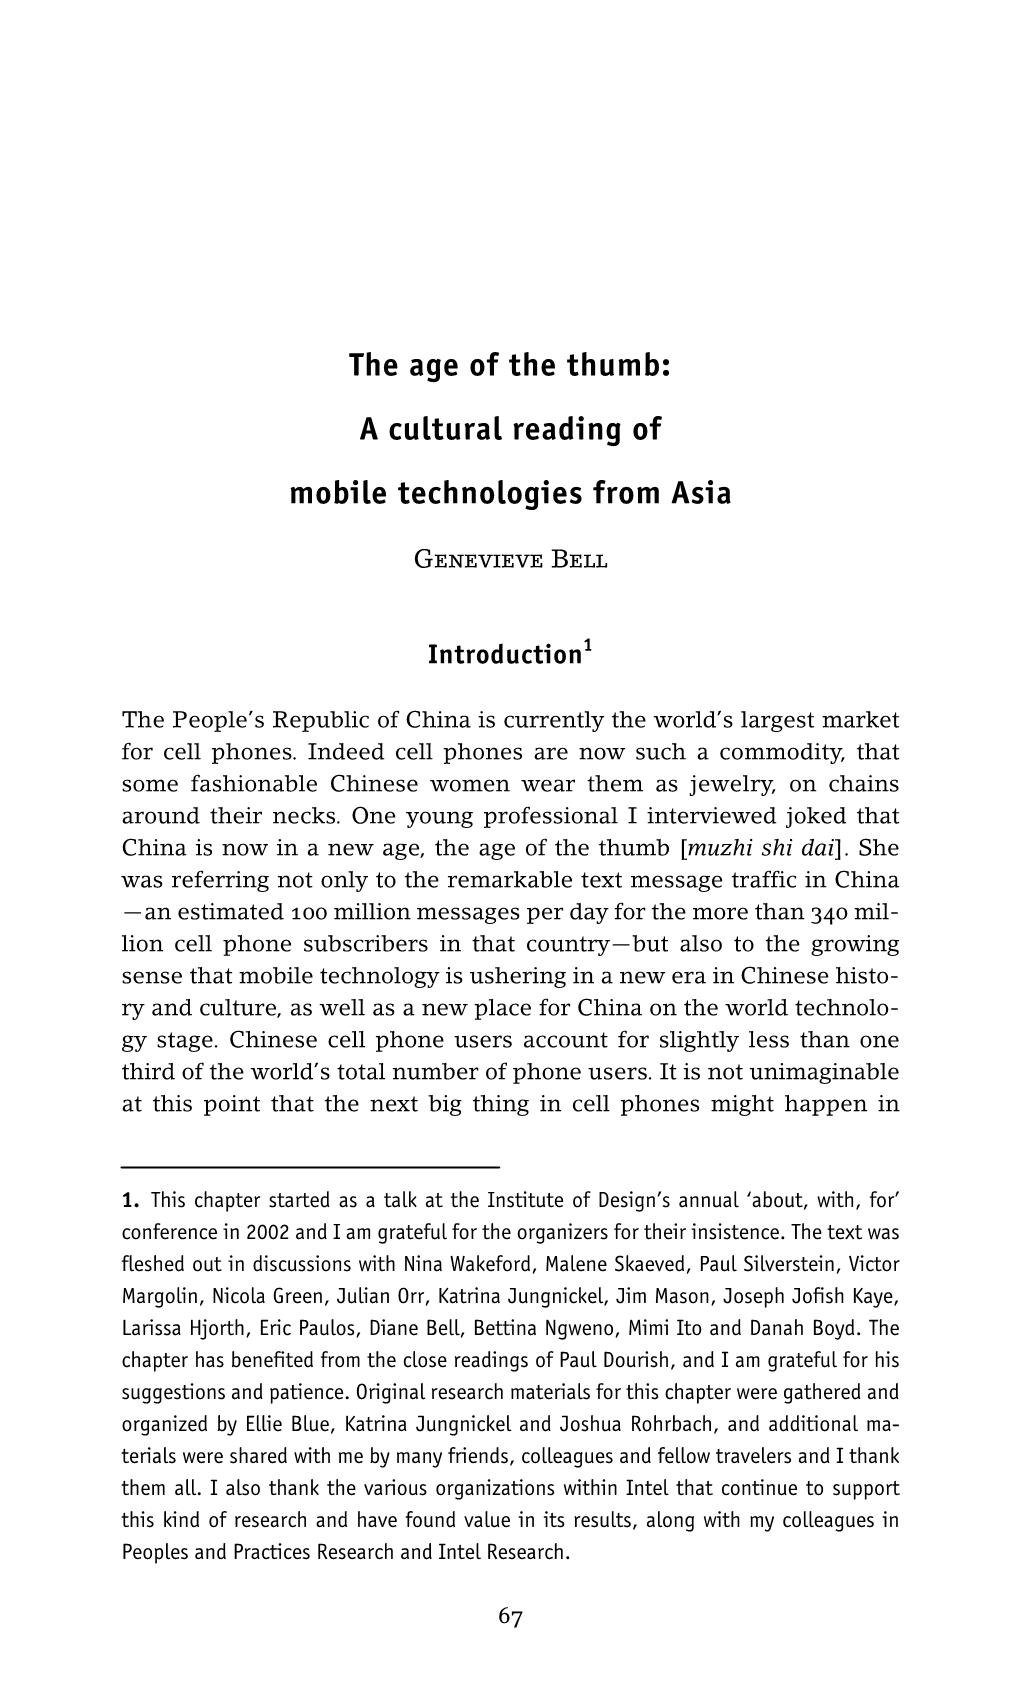 A Cultural Reading of Mobile Technologies from Asia